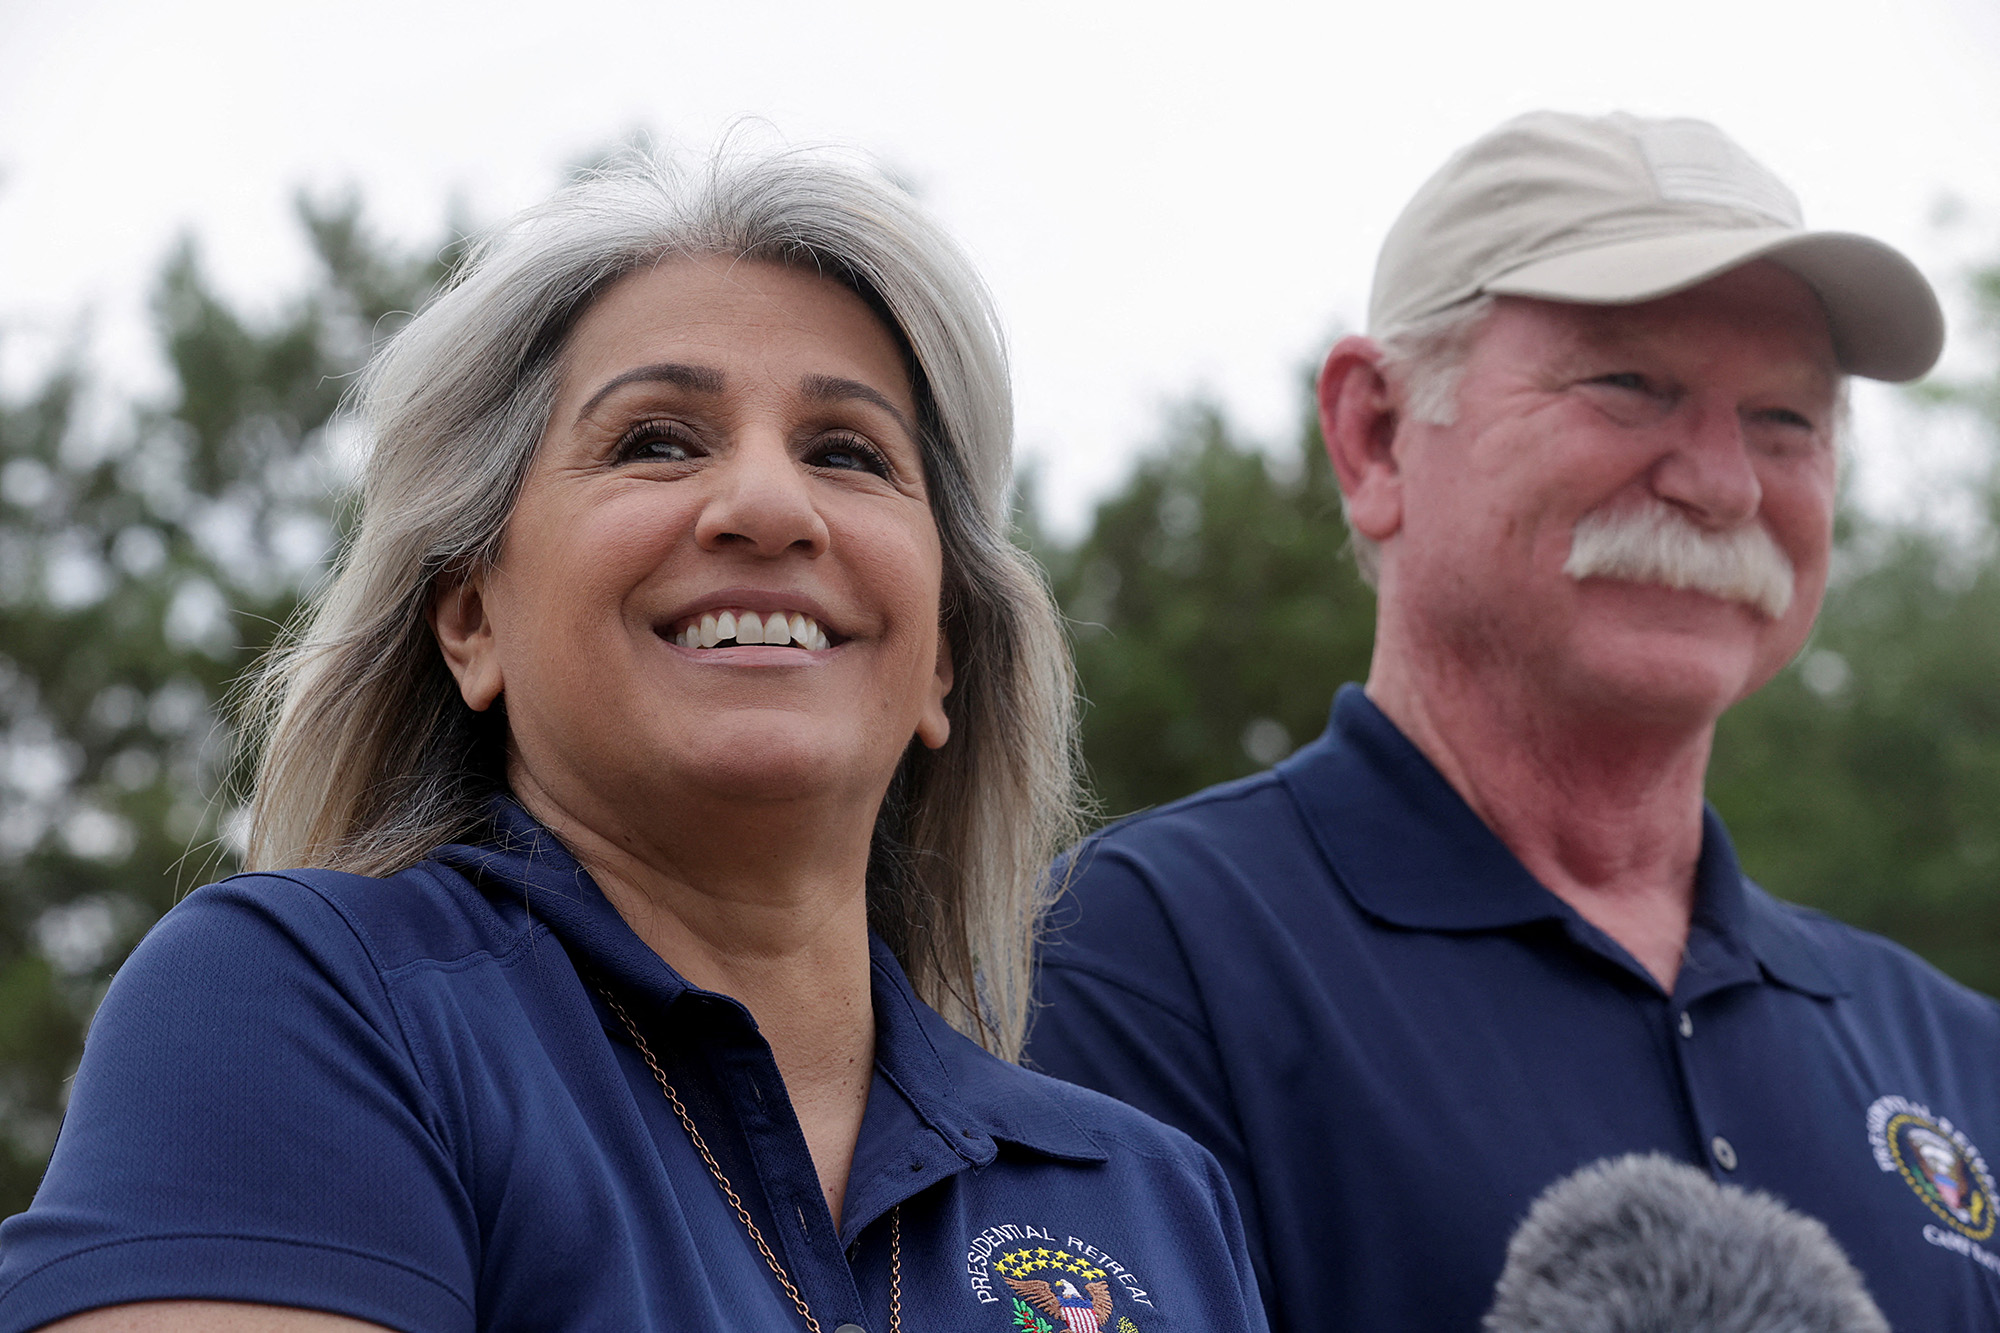 Paula and Joey Reed speak at a news conference in Granbury, Texas, U.S, concerning the homecoming of their son, U.S. Marine Trevor Reed, who was convicted in 2019 in Russia and released in exchange for Russian pilot Konstantin Yaroshenko on April 27.